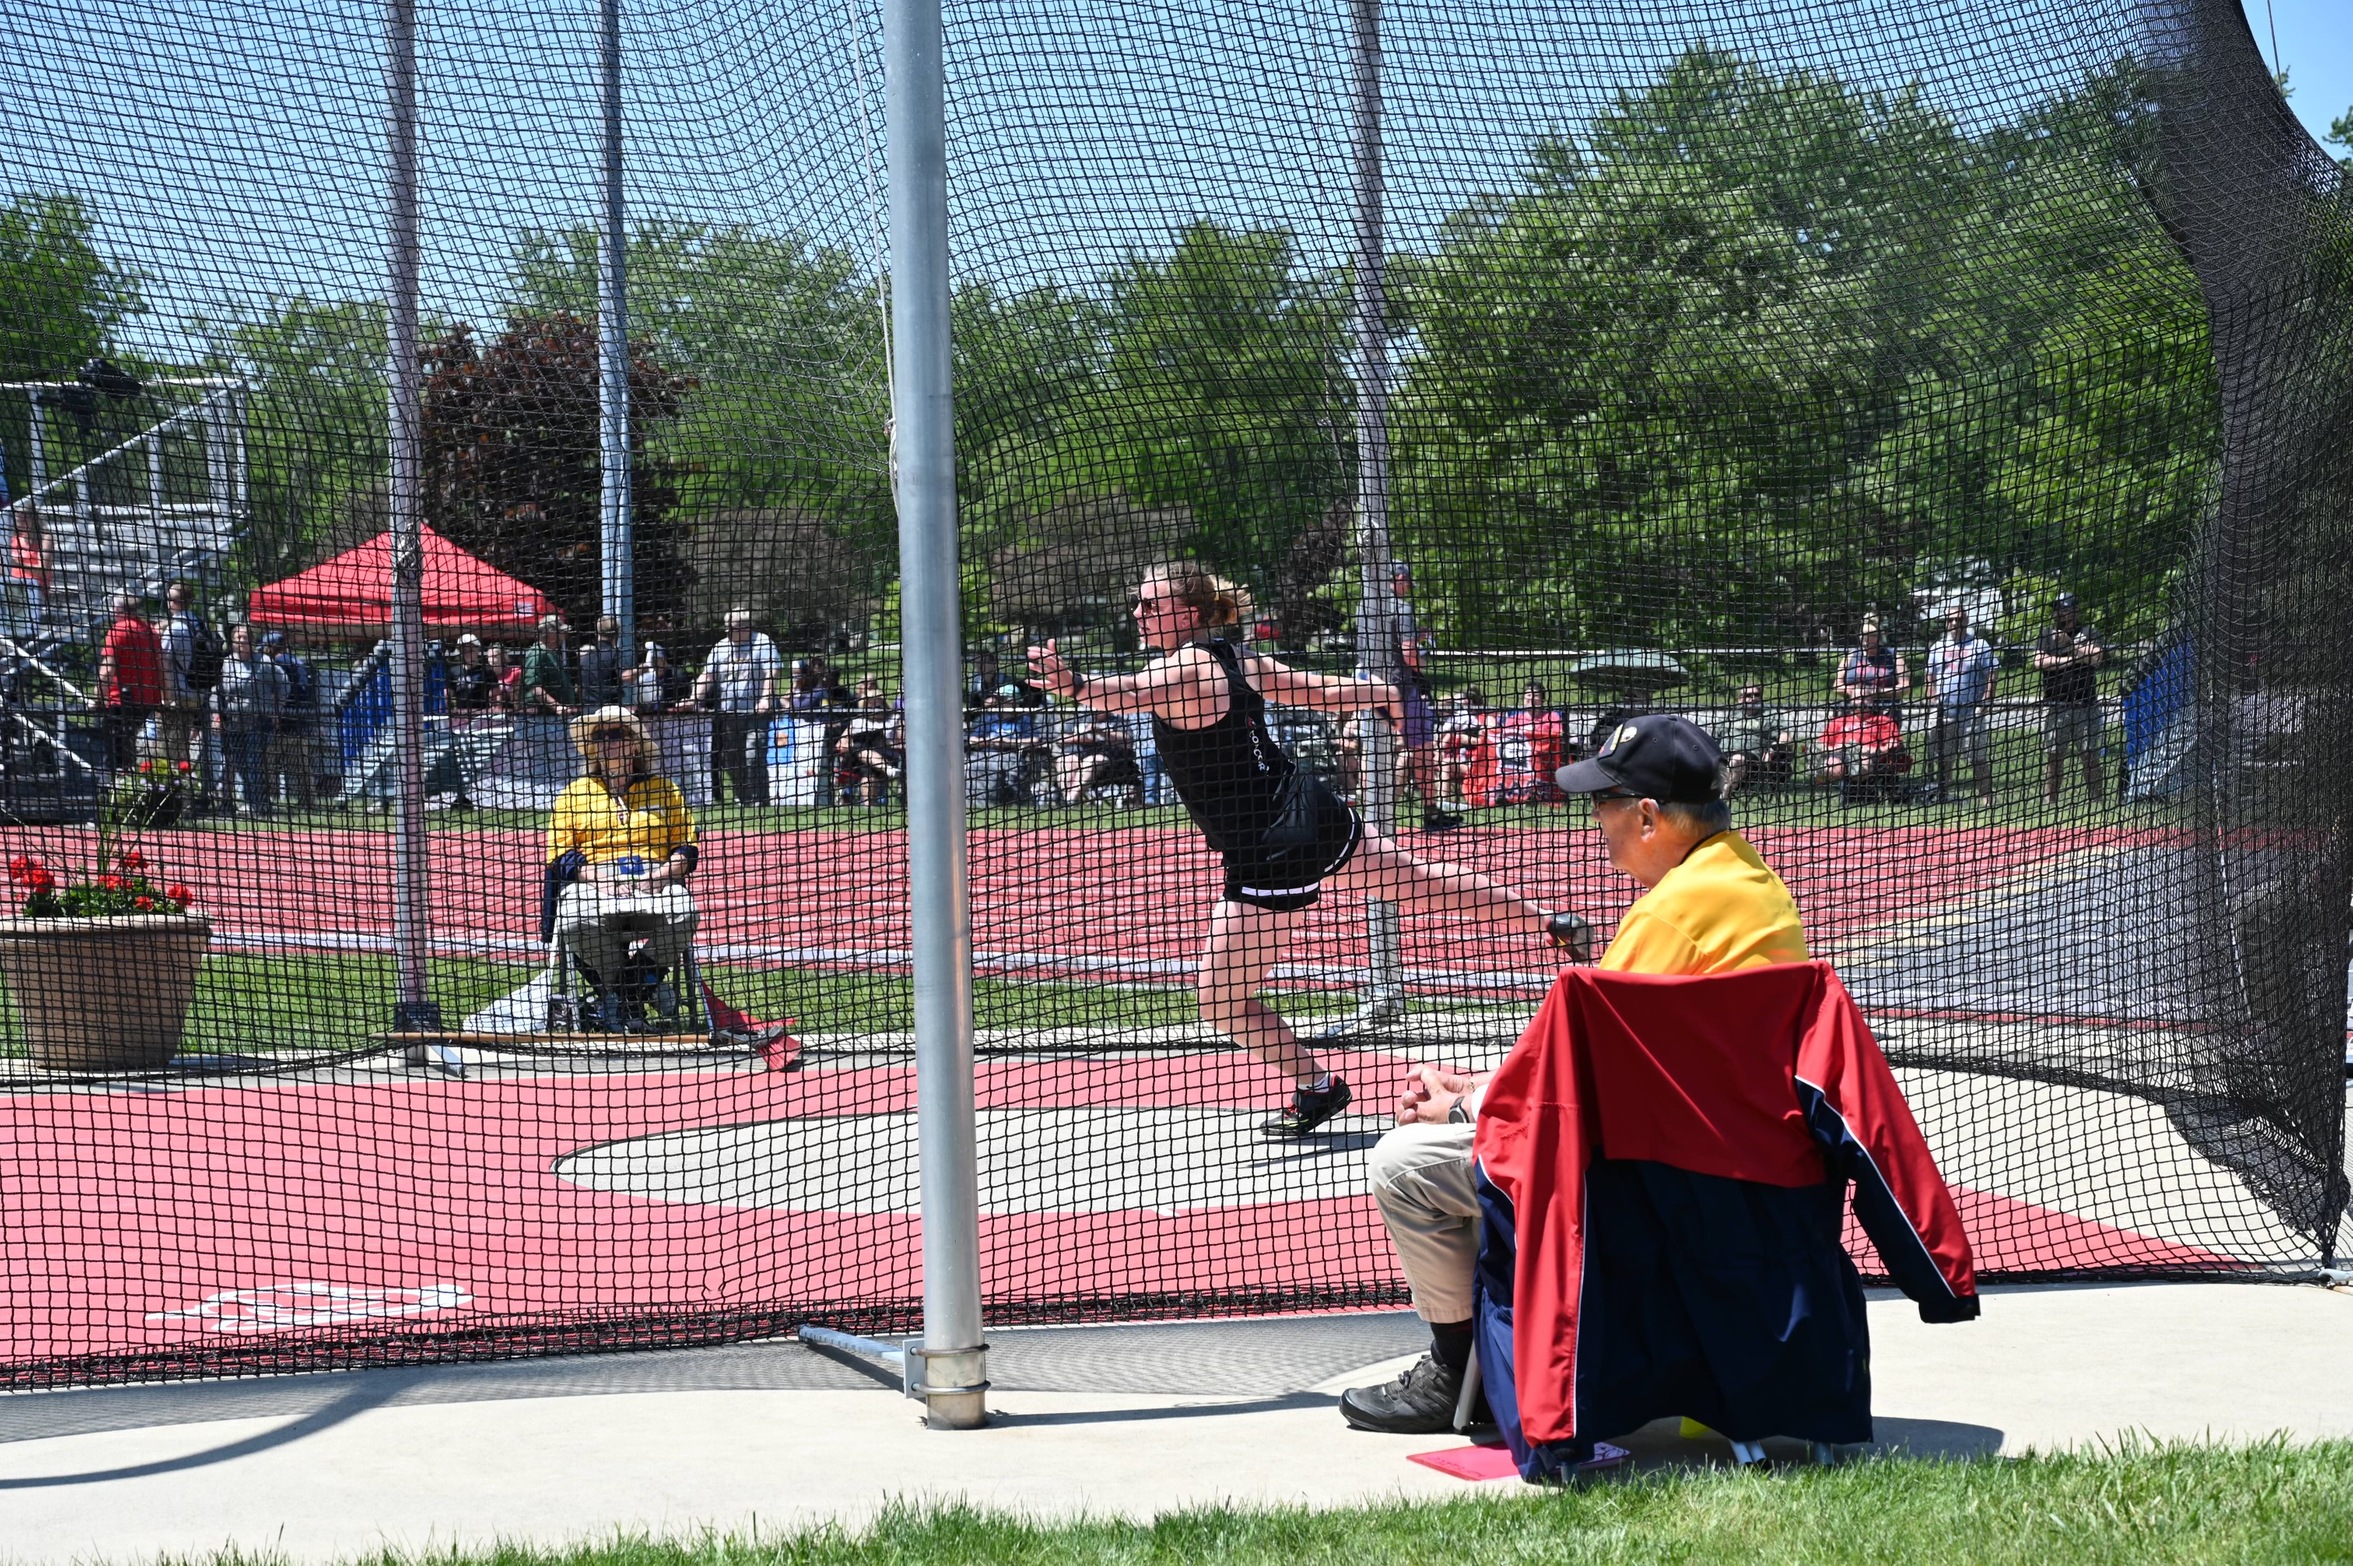 Hirt competes at the final day of the NAIA Championships